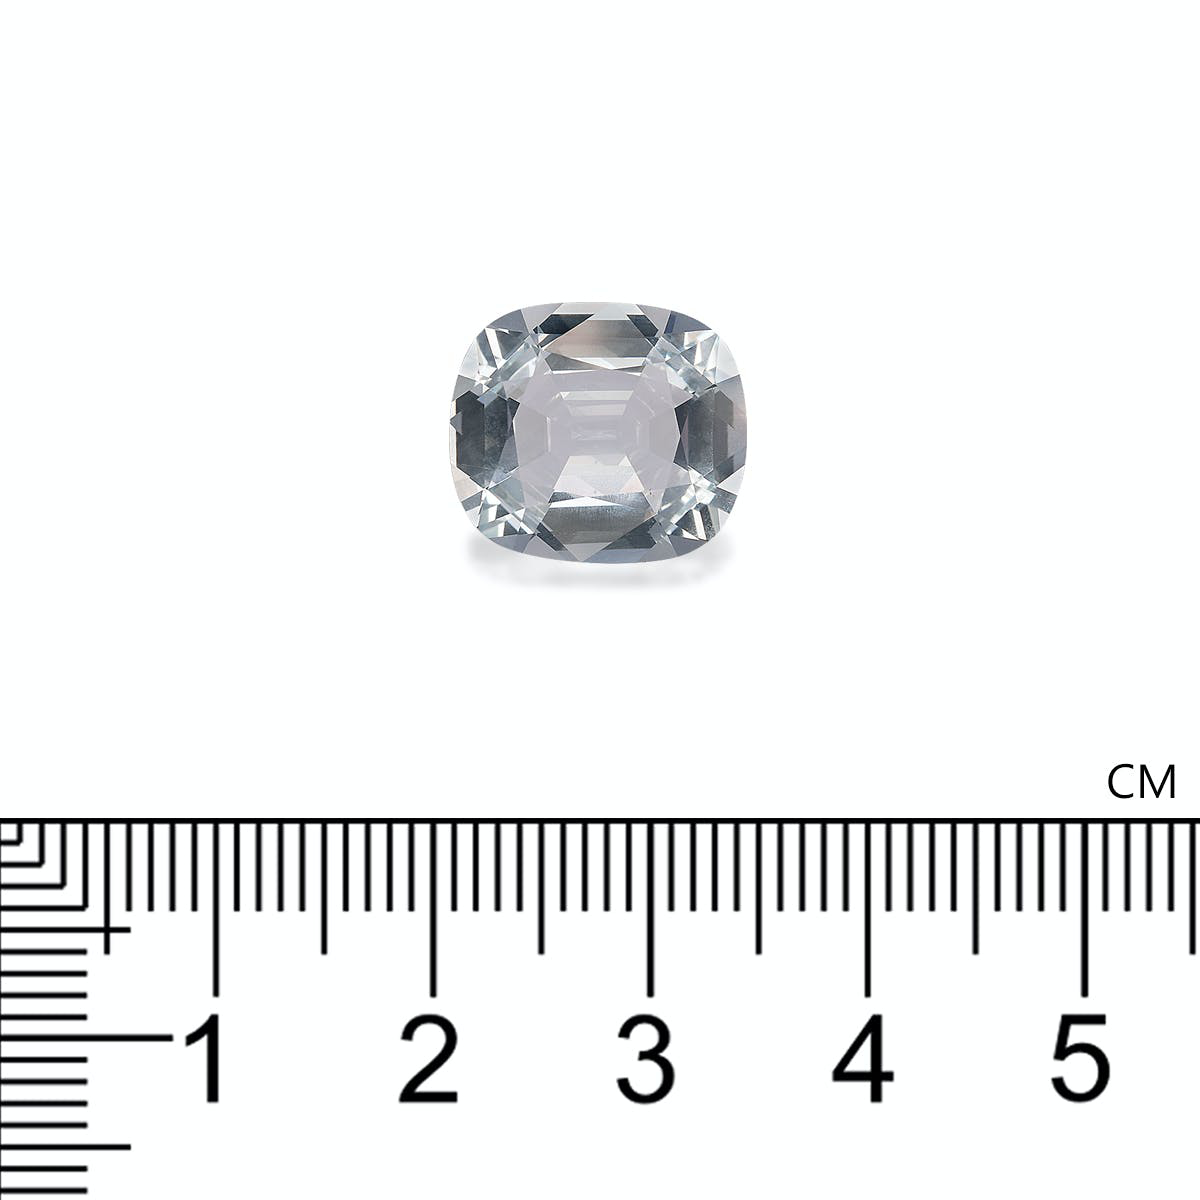 Picture of Frost White Aquamarine 6.56ct - 14x12mm (AQ2660)